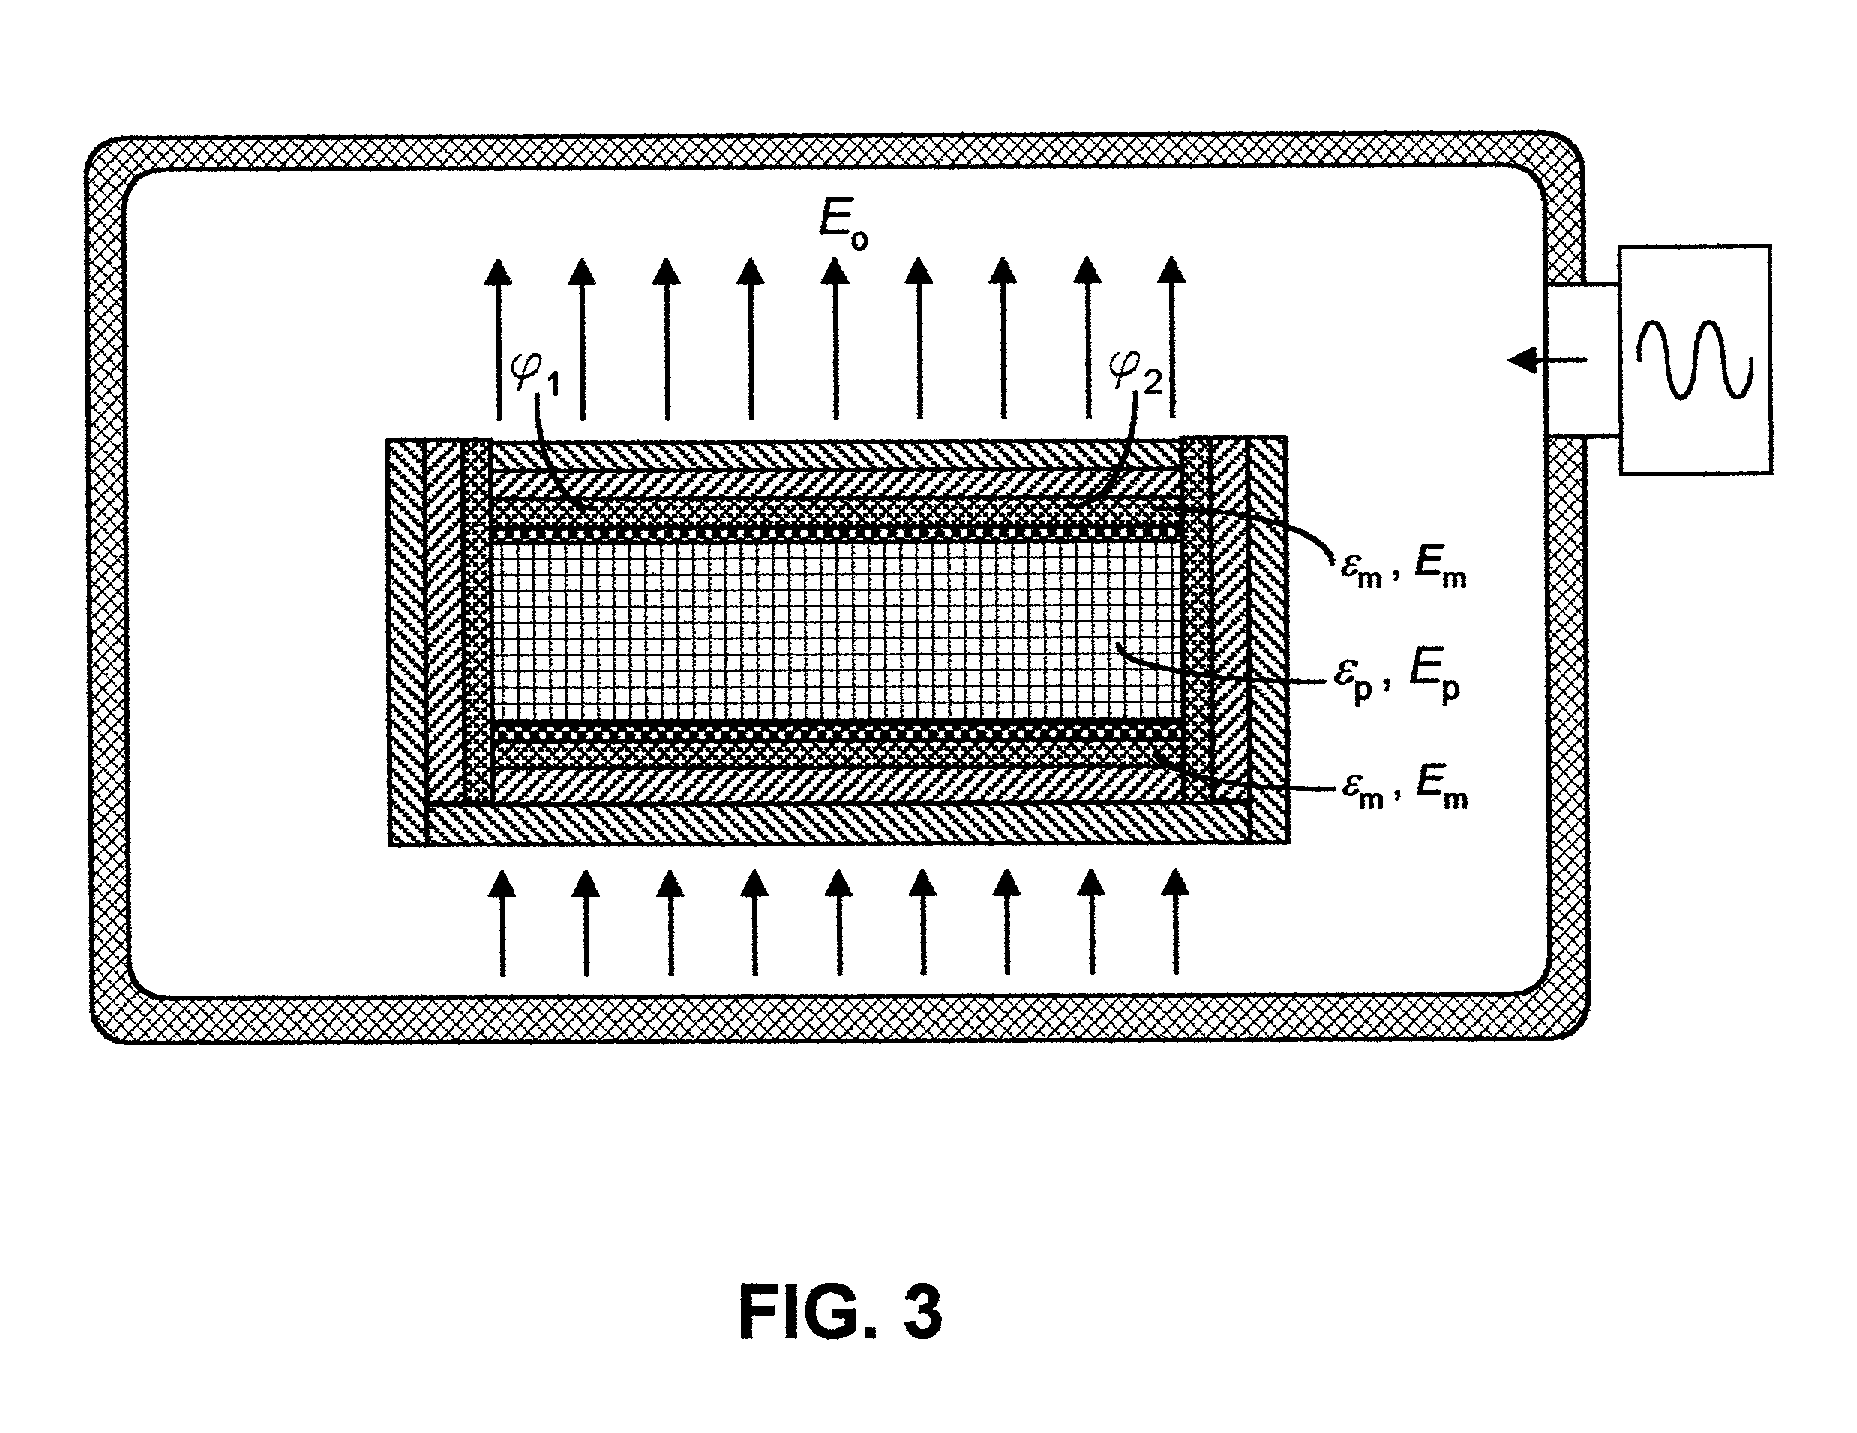 Dielectric mold for uniform heating and molding of polymers and composites in microwave ovens